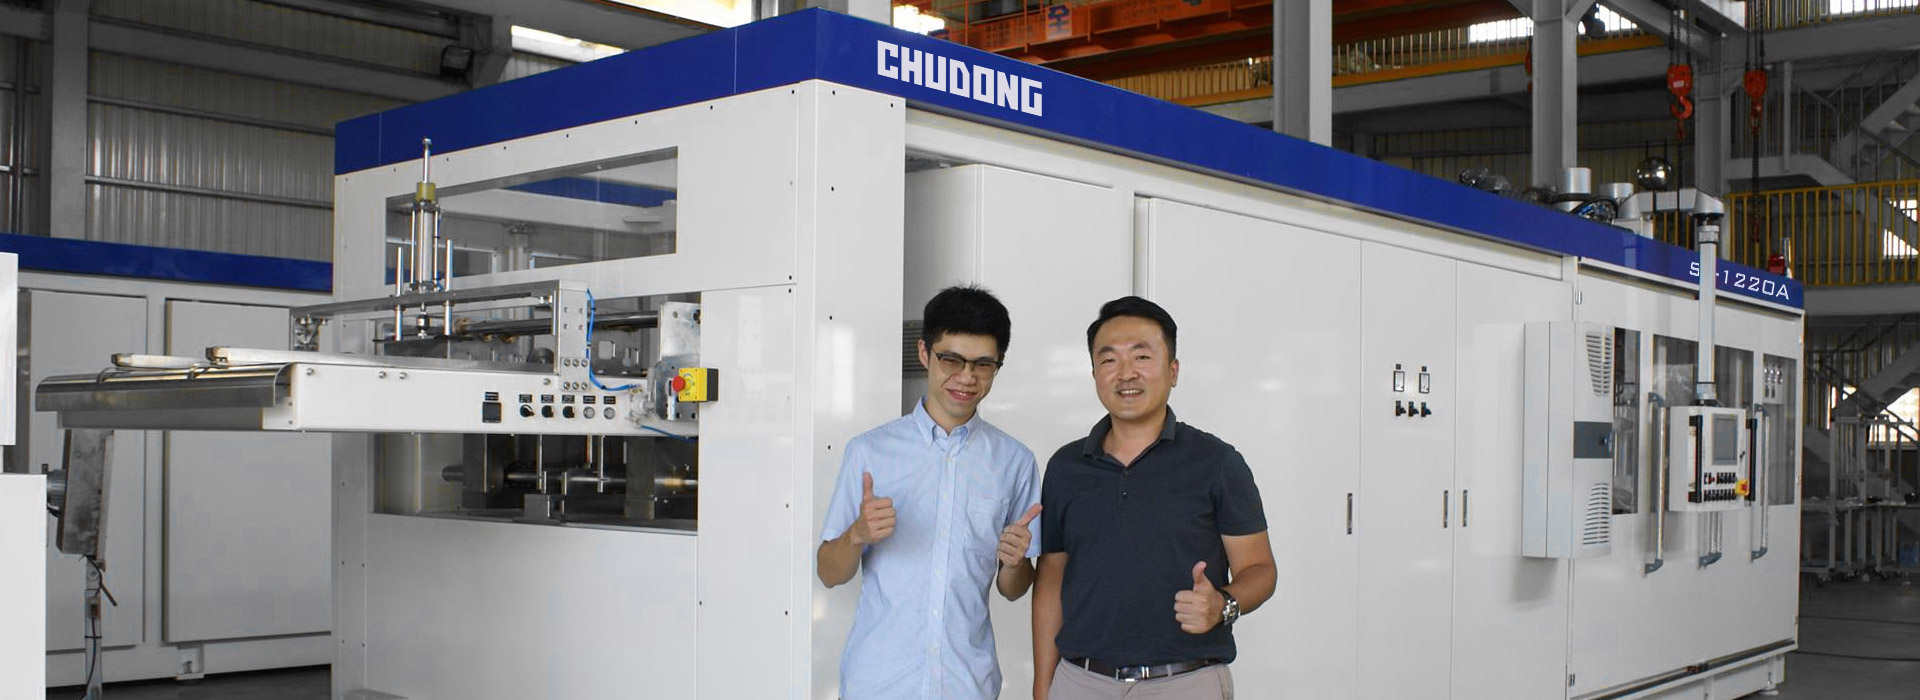 A major player in the fruit export market, Chile introduces <br id="br_lg">the CHUDONG  <br id="br_md">SL-1220A continuous thermoforming machine